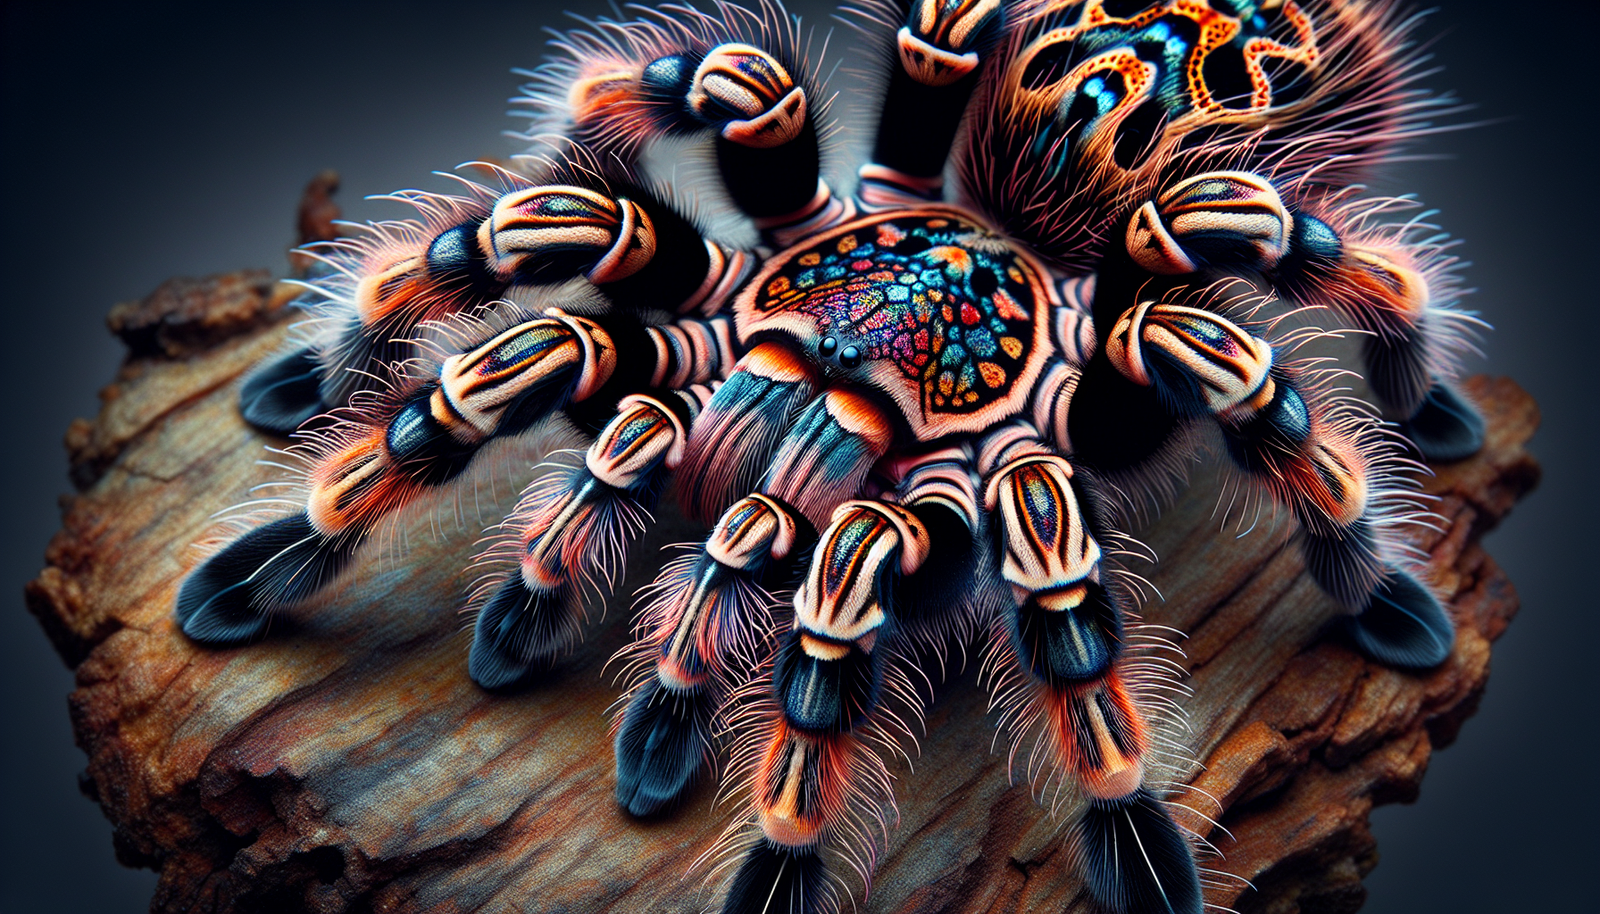 What Is The Lifespan And Growth Rate Of The Strikingly Colored Indian Ornamental Tarantula?